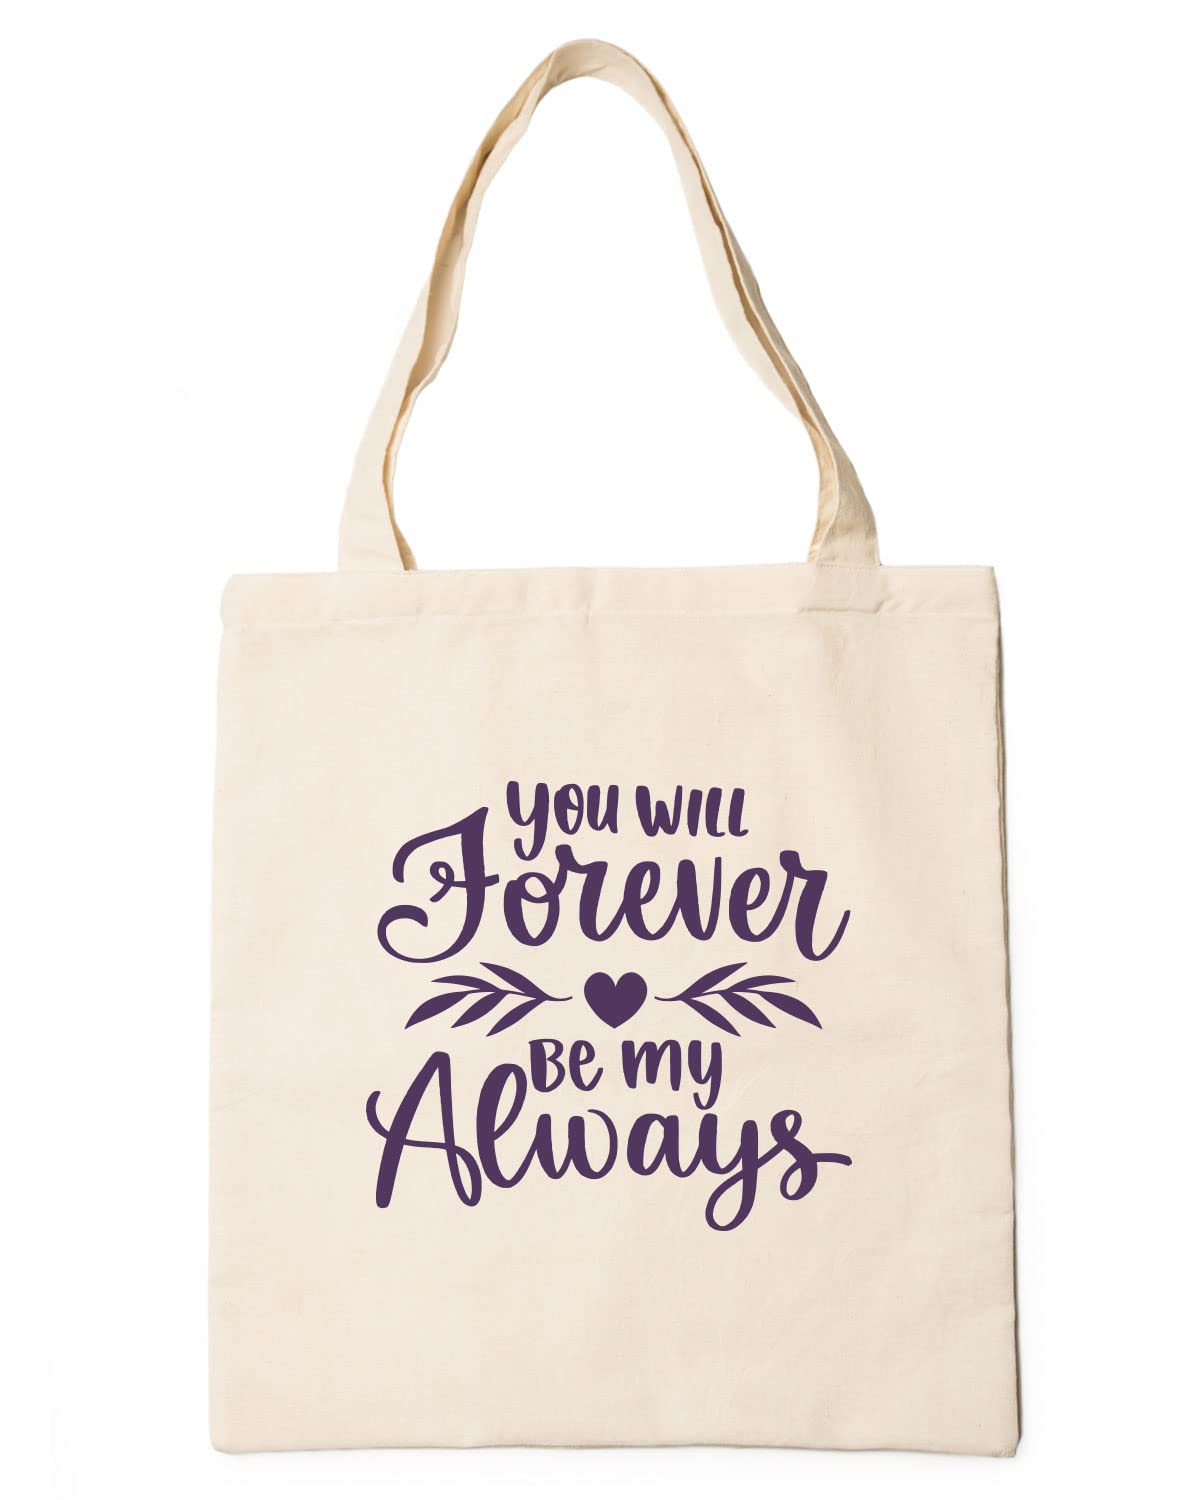 The Pink Magnet You Will Forever Be My Always Tote Bag - Canvas Tote Bag for Women | Printed Multipurpose Cotton Bags | Cute Hand Bag for Girls | Best for College, Travel, Grocery | Reusable Shopping Bag | Eco-Friendly Tote Bag